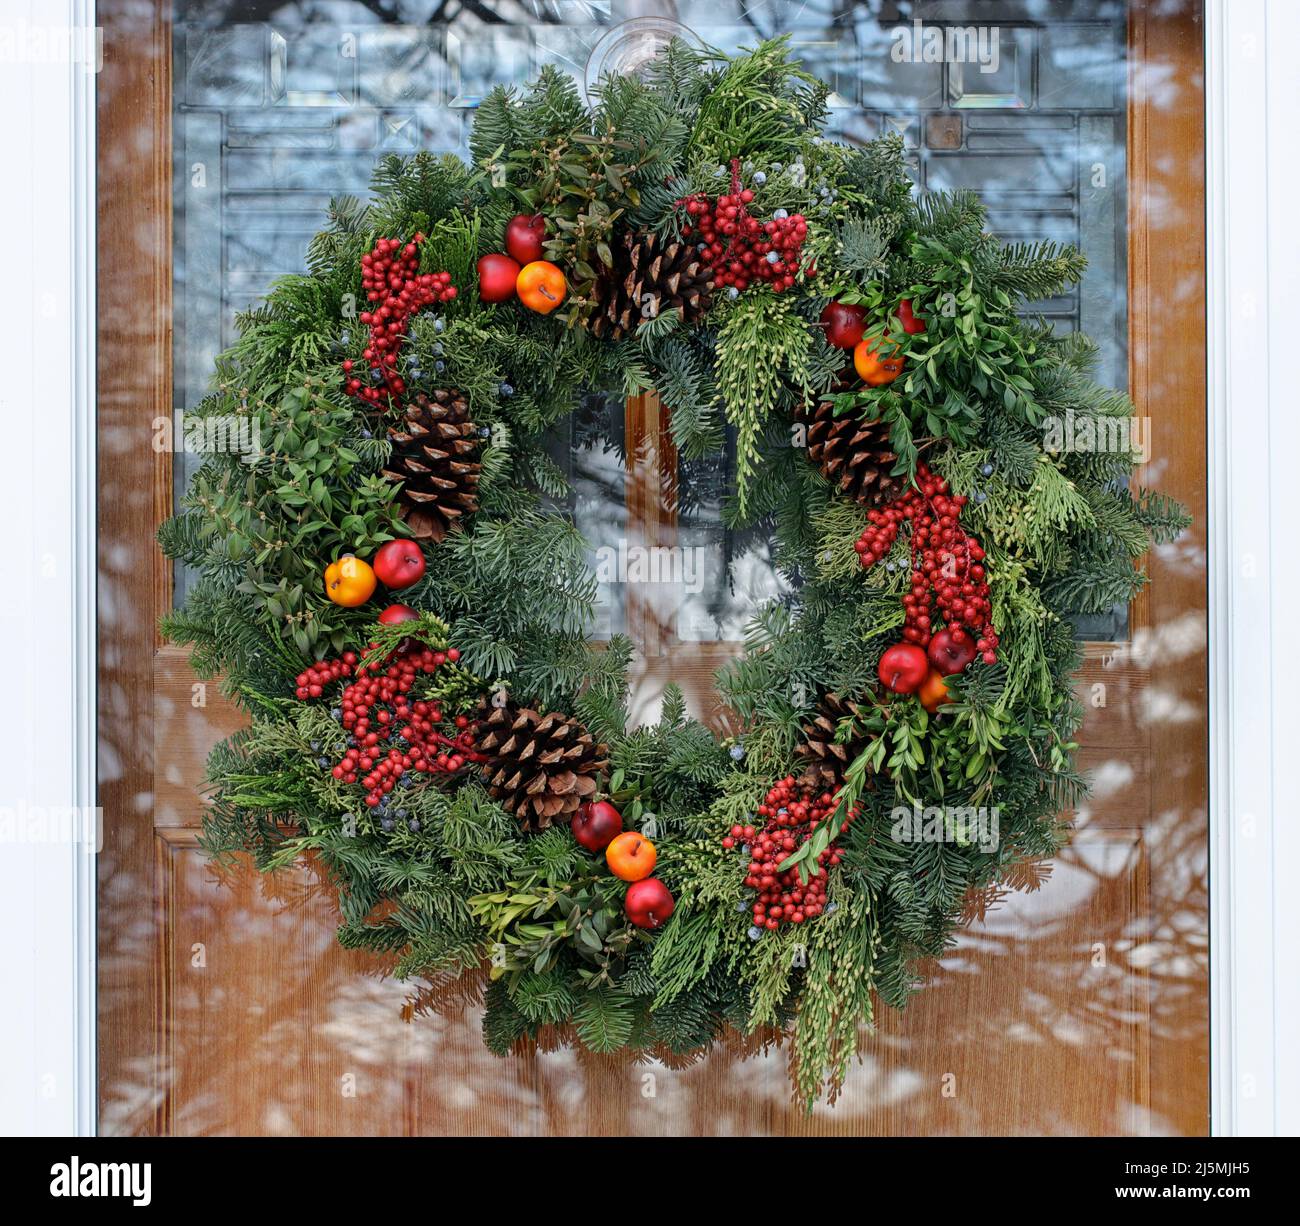 Close-up of a decorative Christmas wreath adorning exterior front door of a New England home Stock Photo